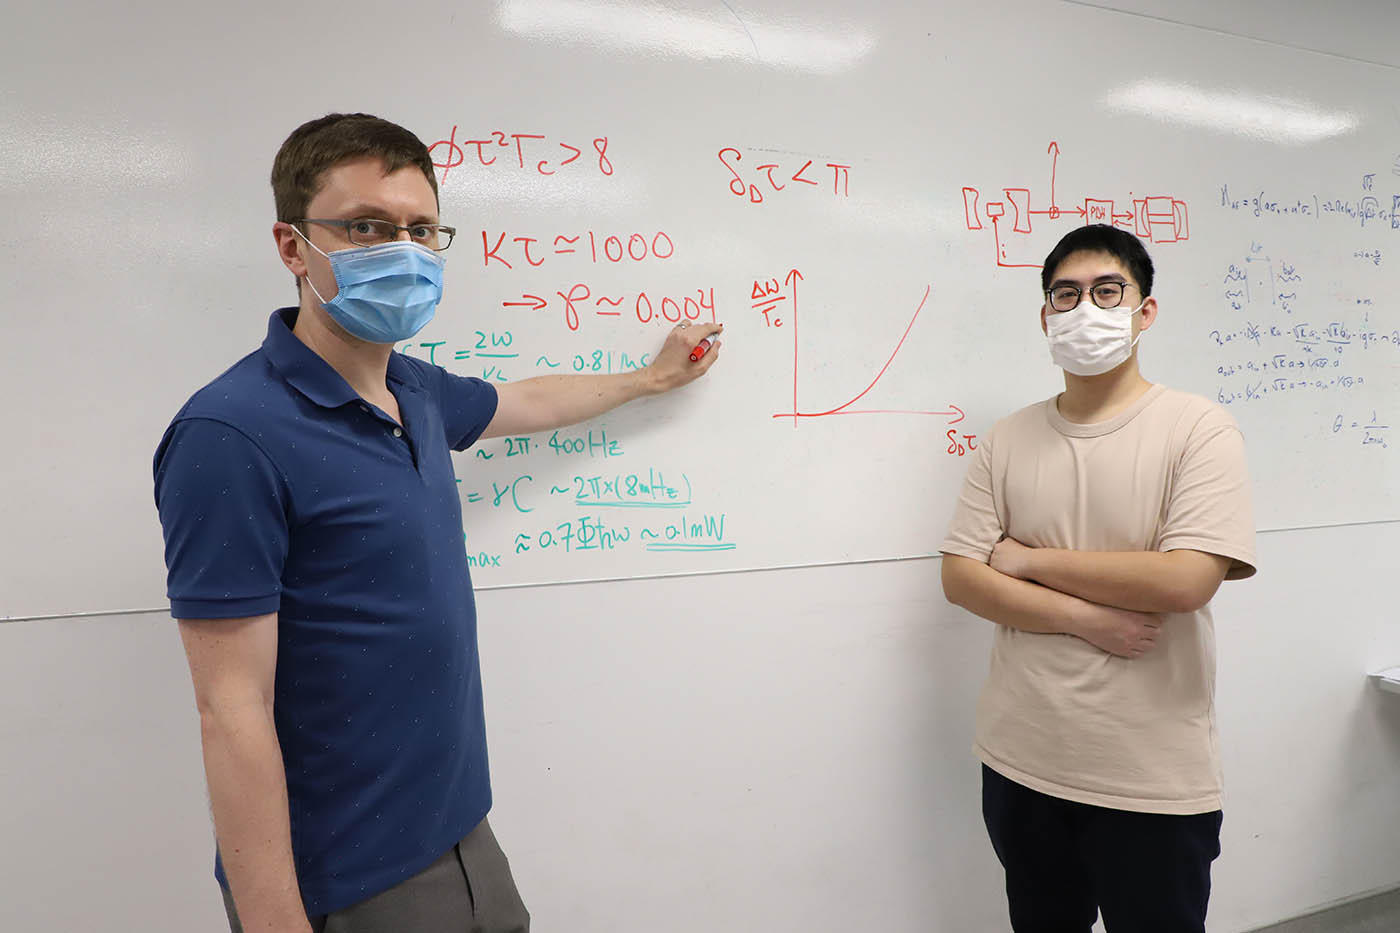 CQT Principal Investigator Travis Nicholson and PhD student Yu Xianquan pictured at a whiteboard with equations describing laser operations.